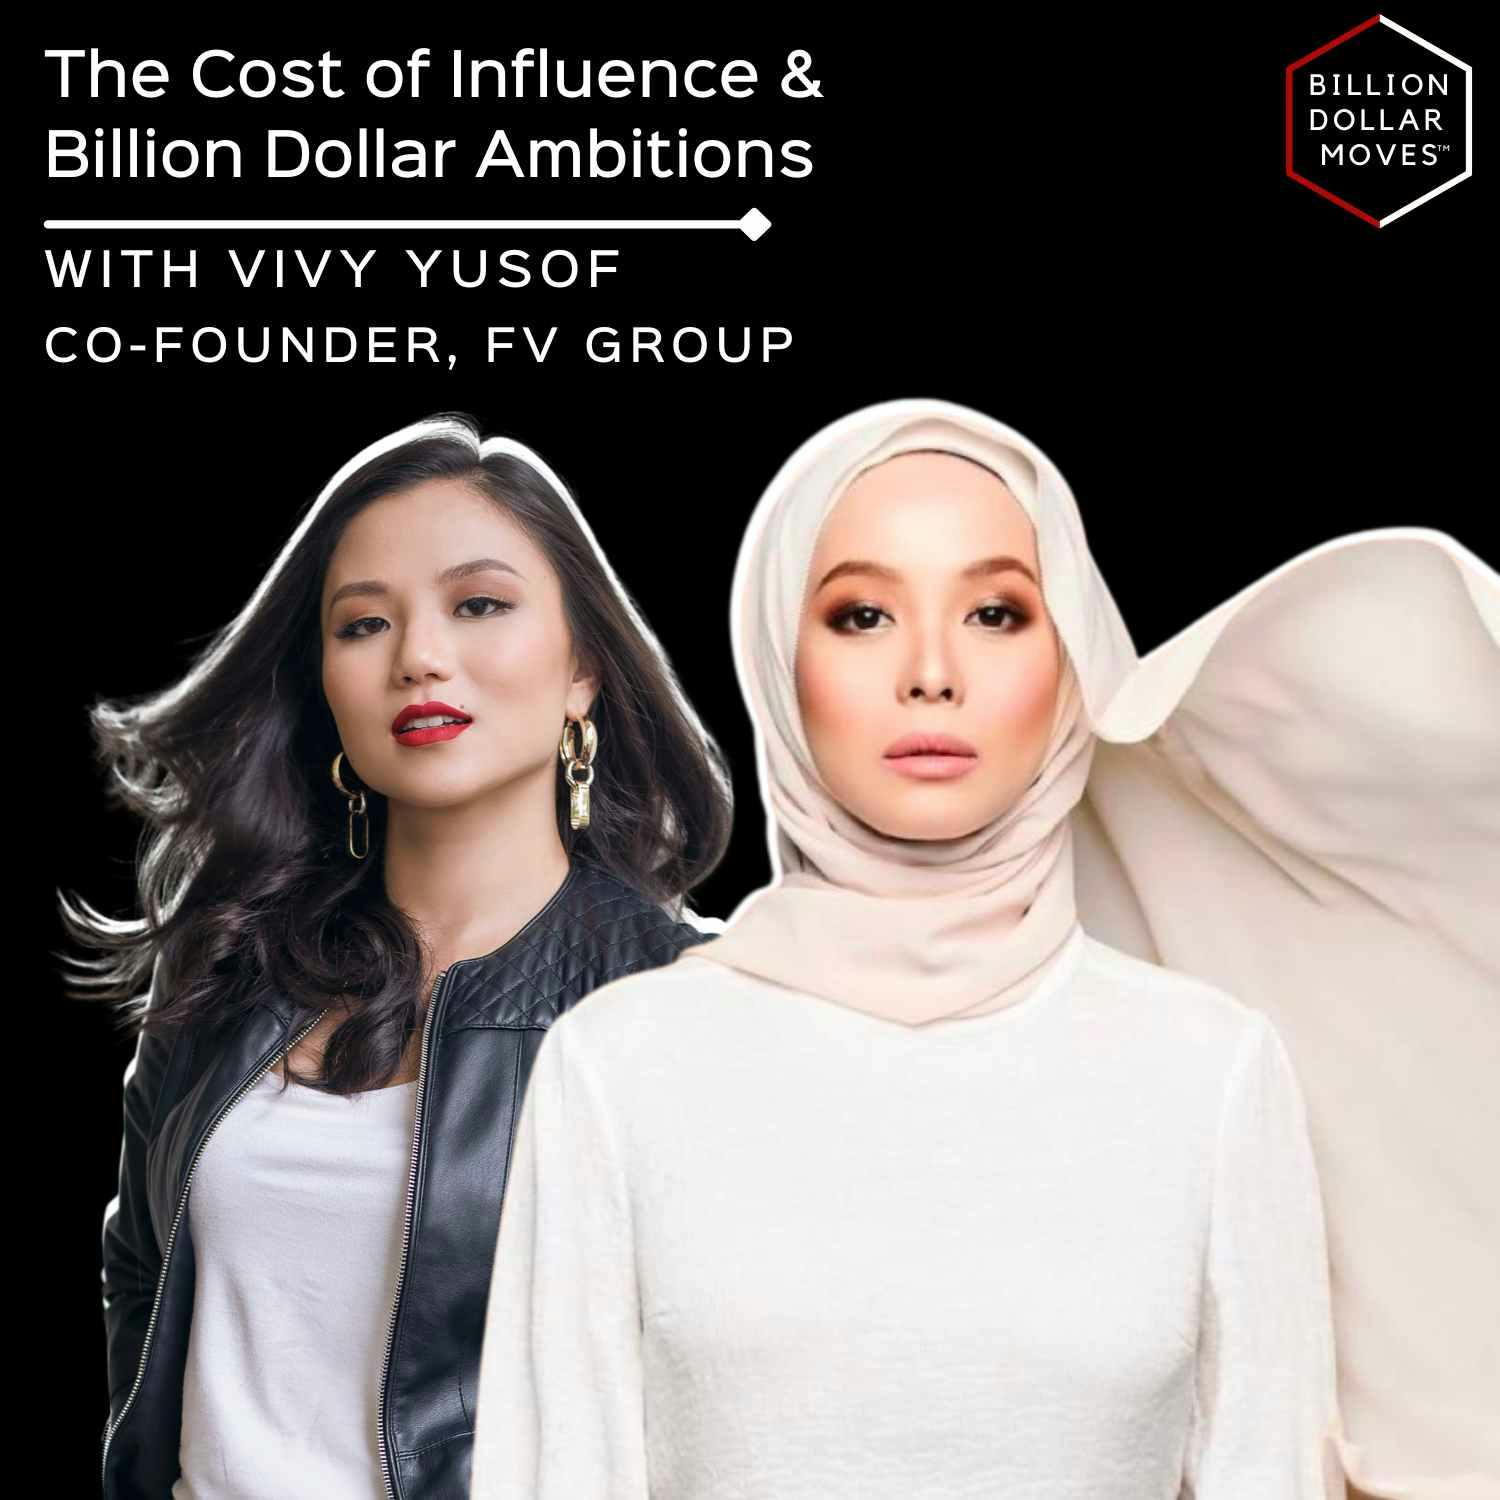 The Cost of Influence & Billion Dollar Ambitions with Vivy Yusof, FV Group